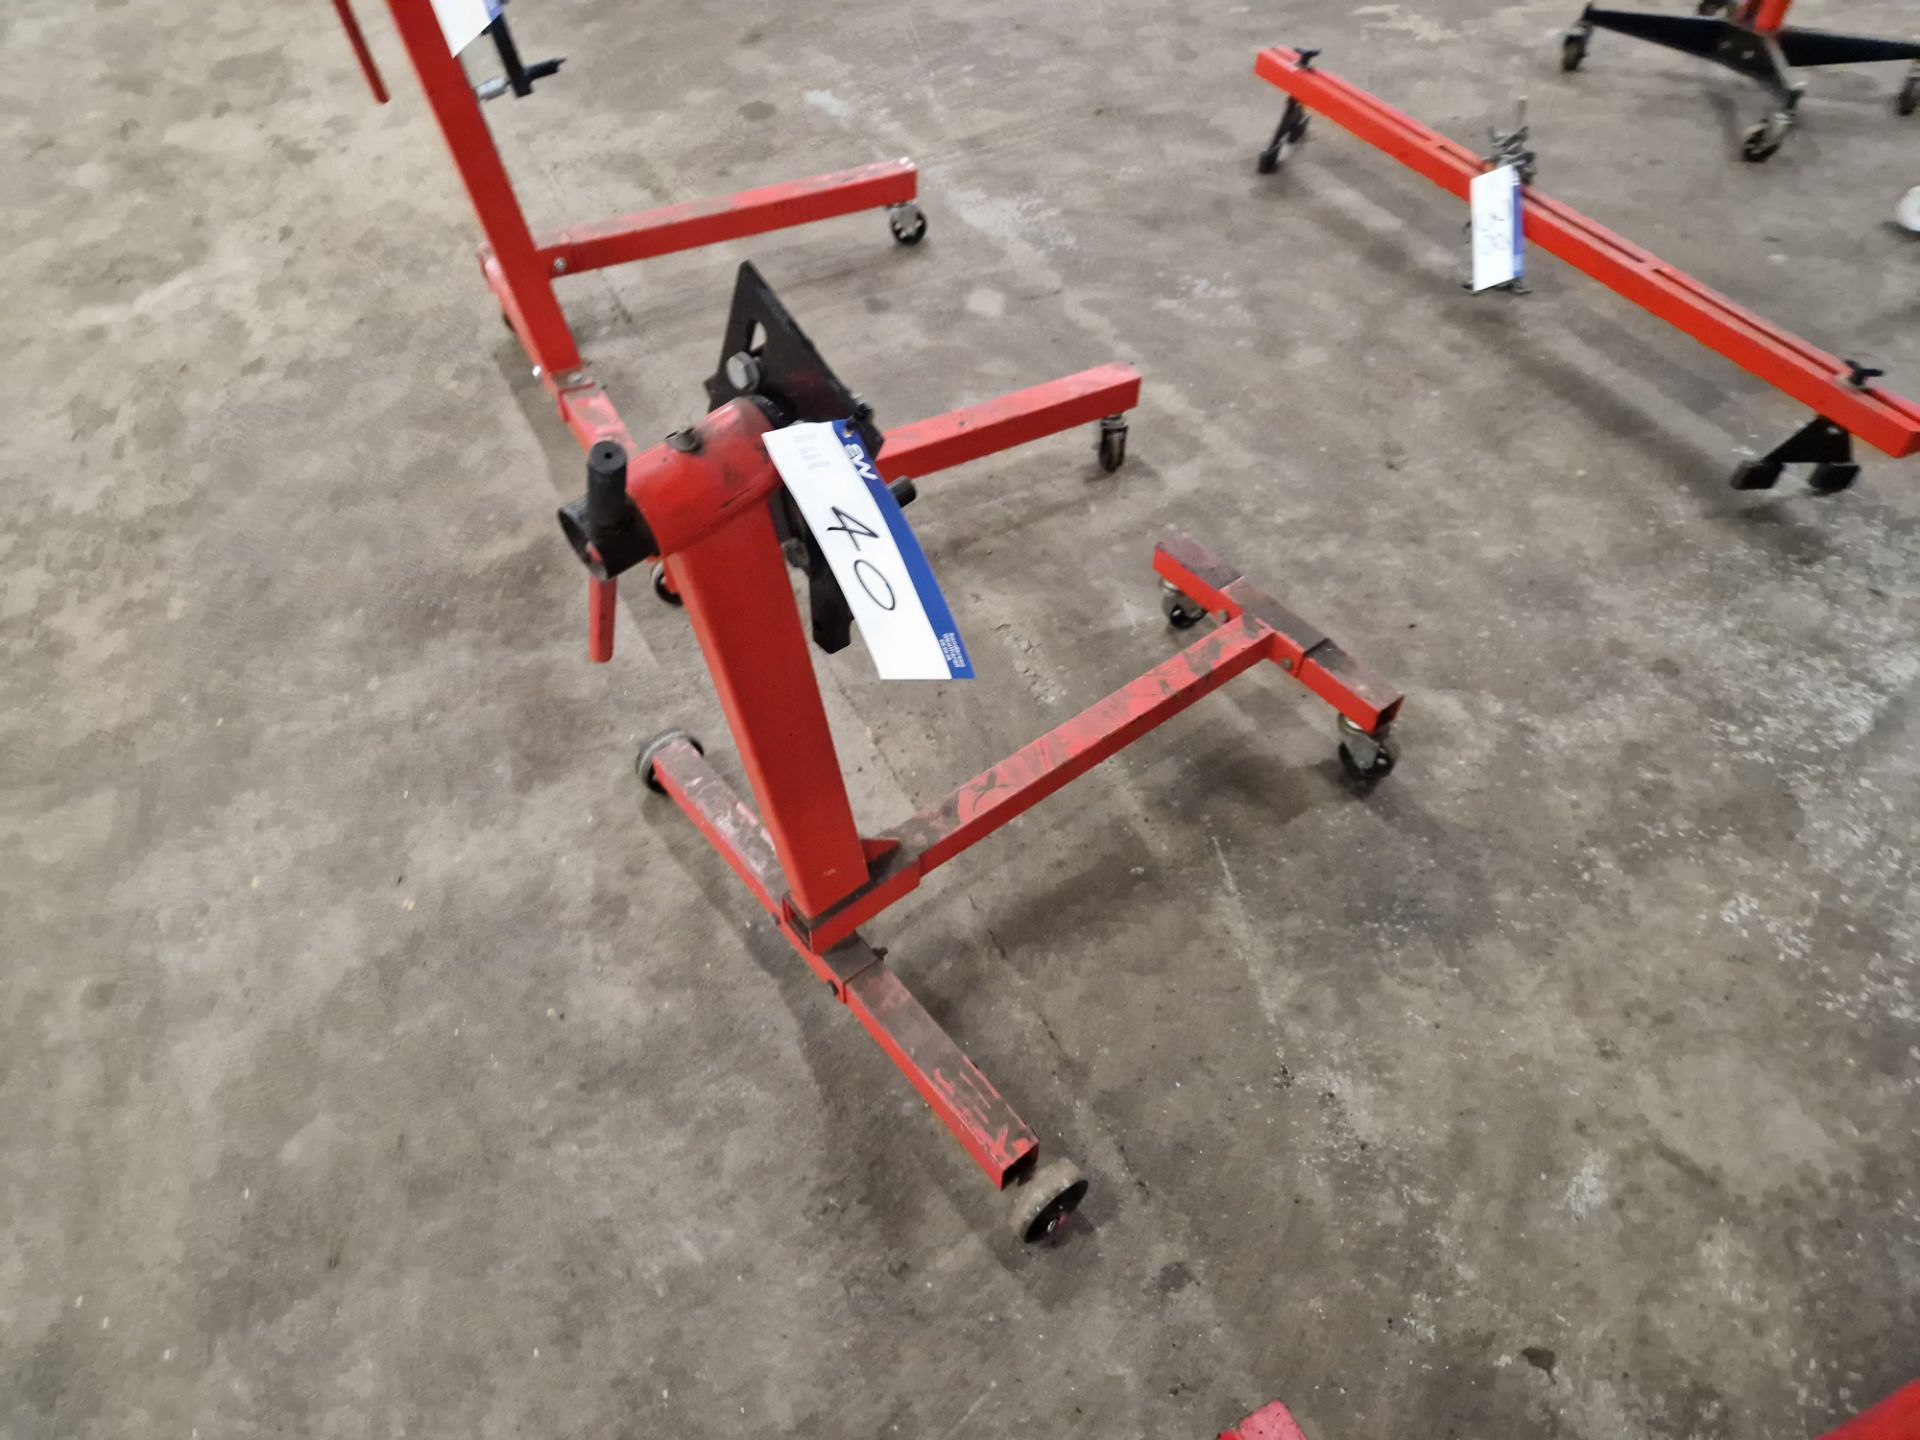 Sealey 450KG Engine Stand Please read the following important notes:- ***Overseas buyers - All